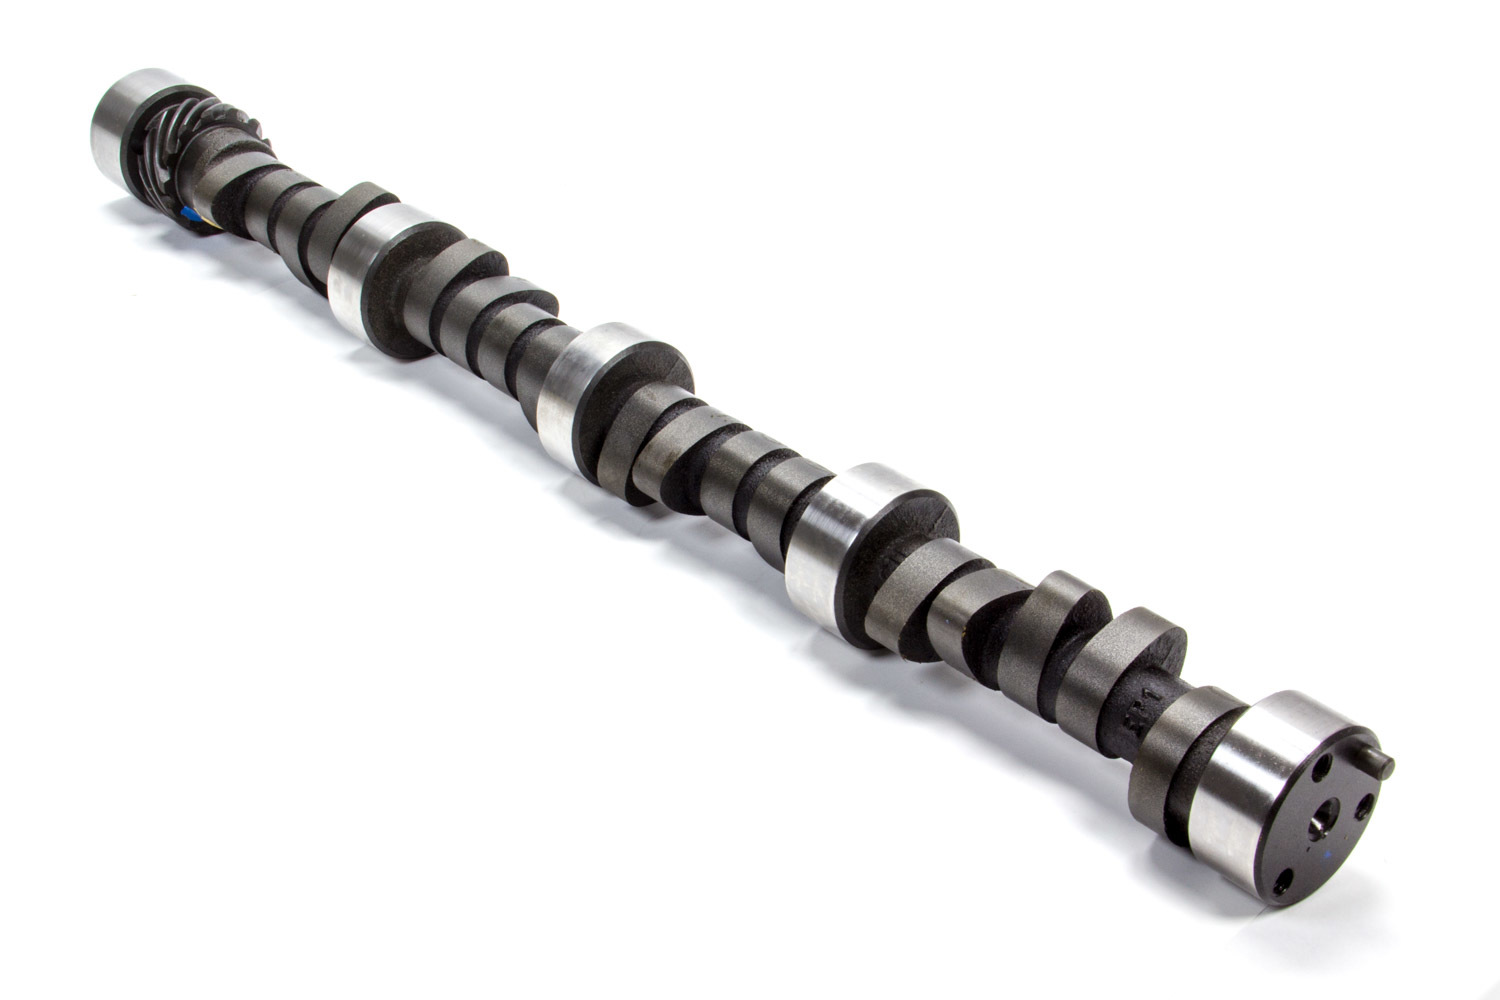 Elgin E-1090-P Camshaft, Oval Track, Mechanical Flat Tappet, Lift 0.537 / 0.557 in, Duration 287 / 295, 111 LSA, 3200 / 6500 RPM, Small Block Chevy, Each